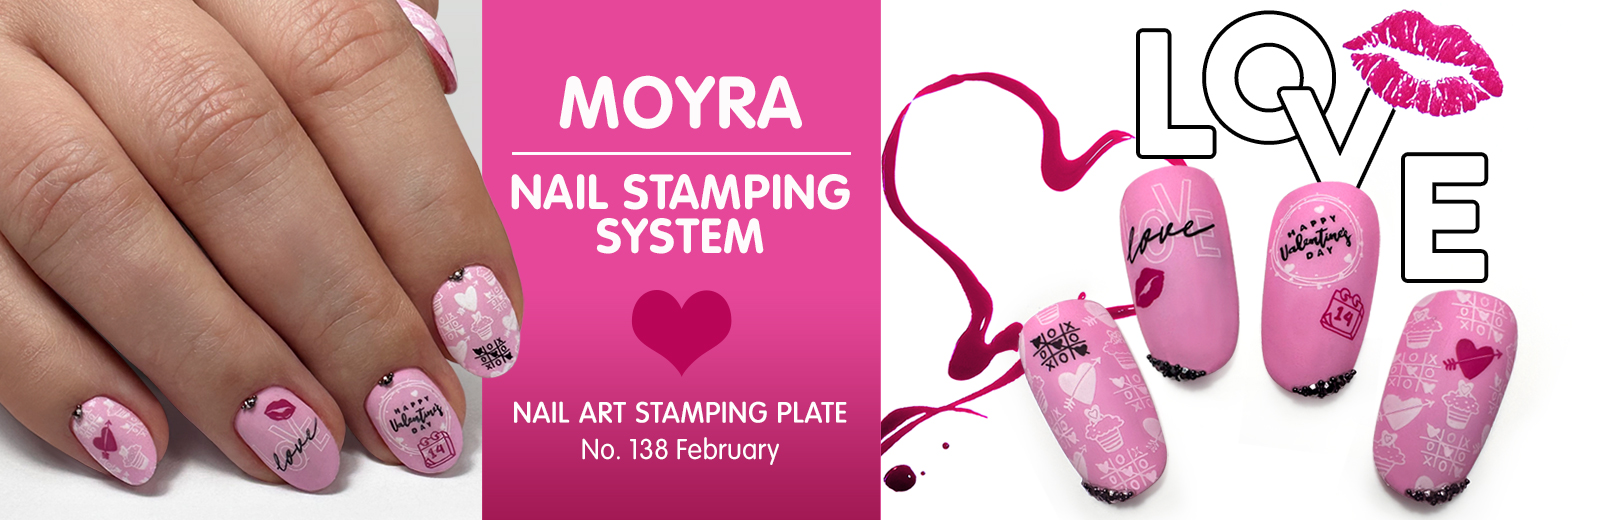 New stamping plate has arrived! No. 138 February